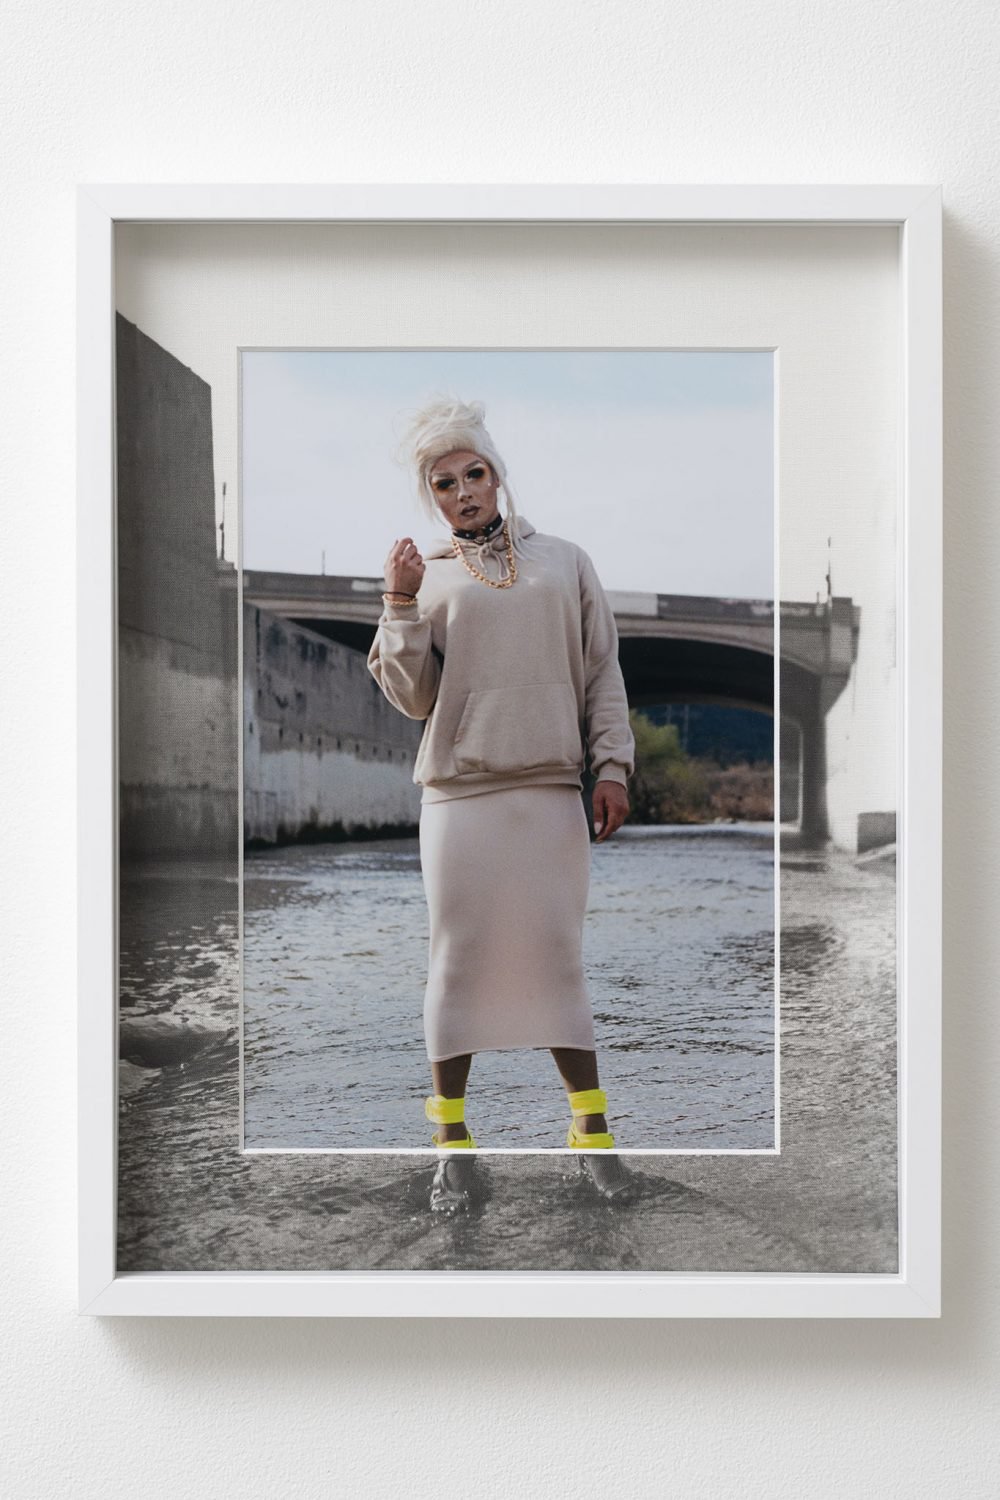 Philipp TimischToo blessed to be stressed, too broke to be bothered. (L.A. RIVER), 2019C-print, framed with custom passepartout43 x 32 cm